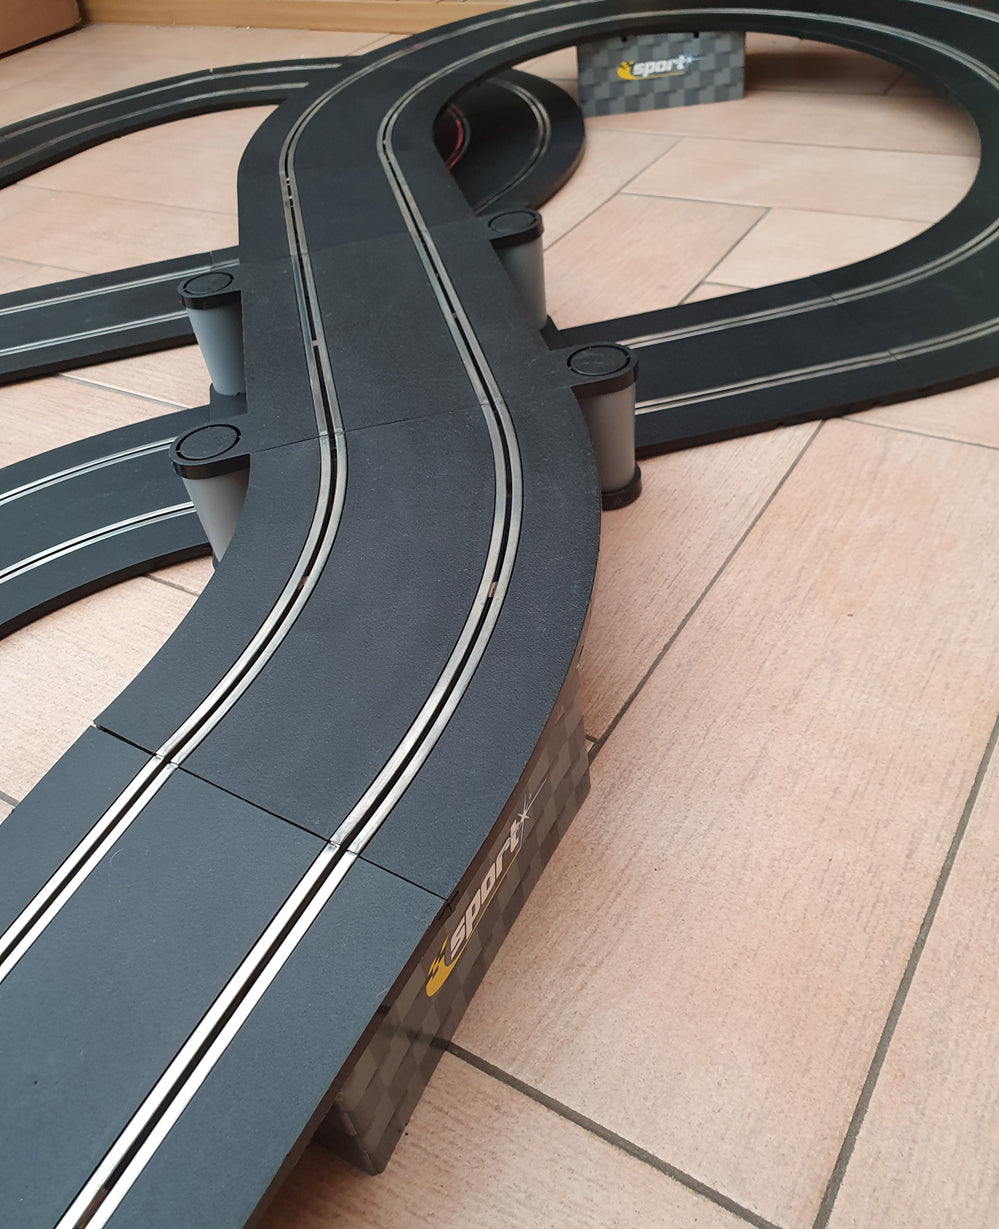 Scalextric Sport 1:32 Track Set Layout With Bugatti Veyron Cars #AS9